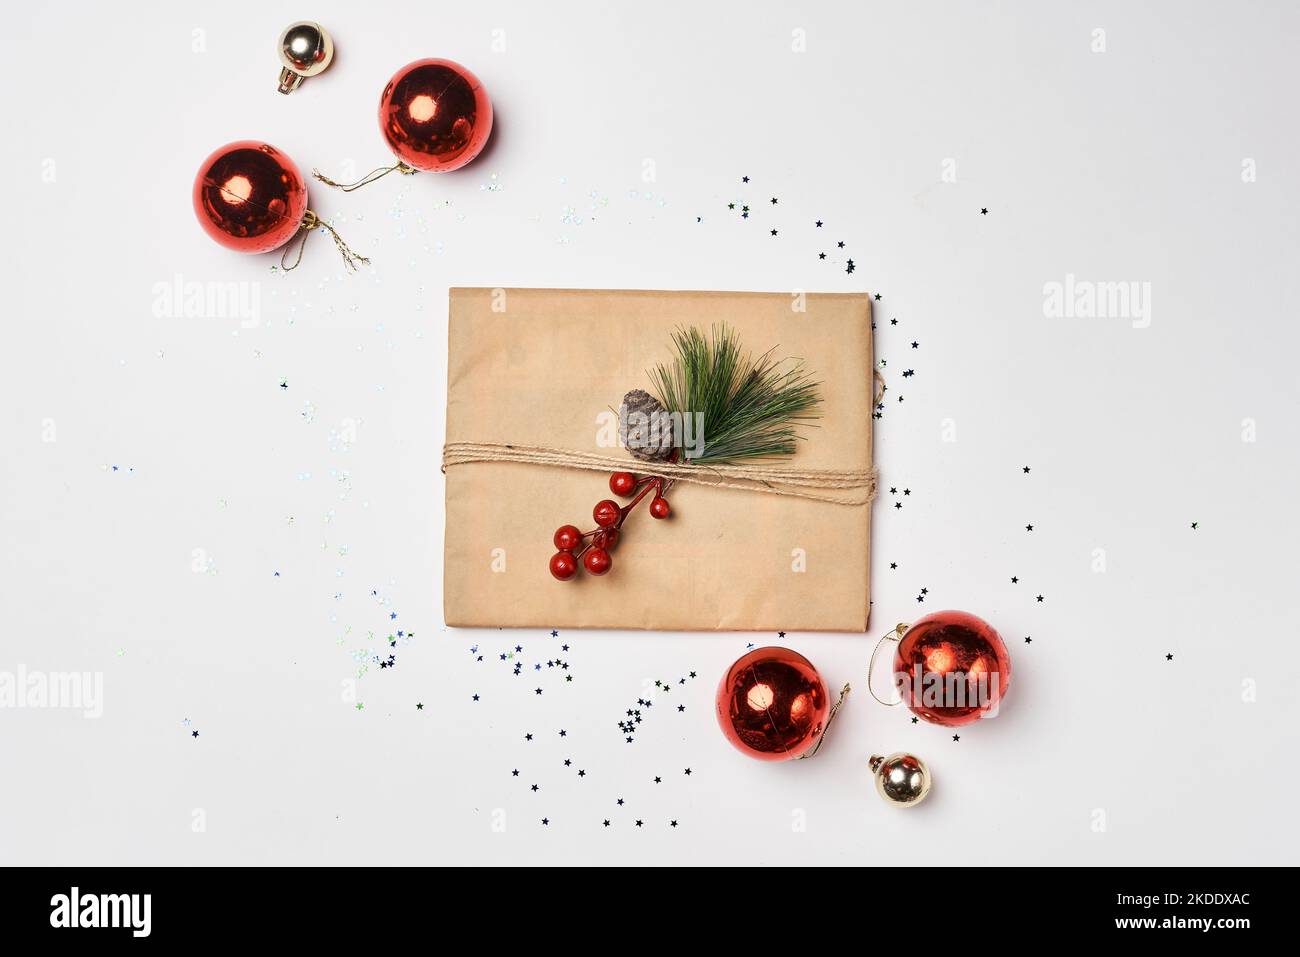 an envelope with christmas decorations around it on a white background, surrounded by confections and pine cones Stock Photo